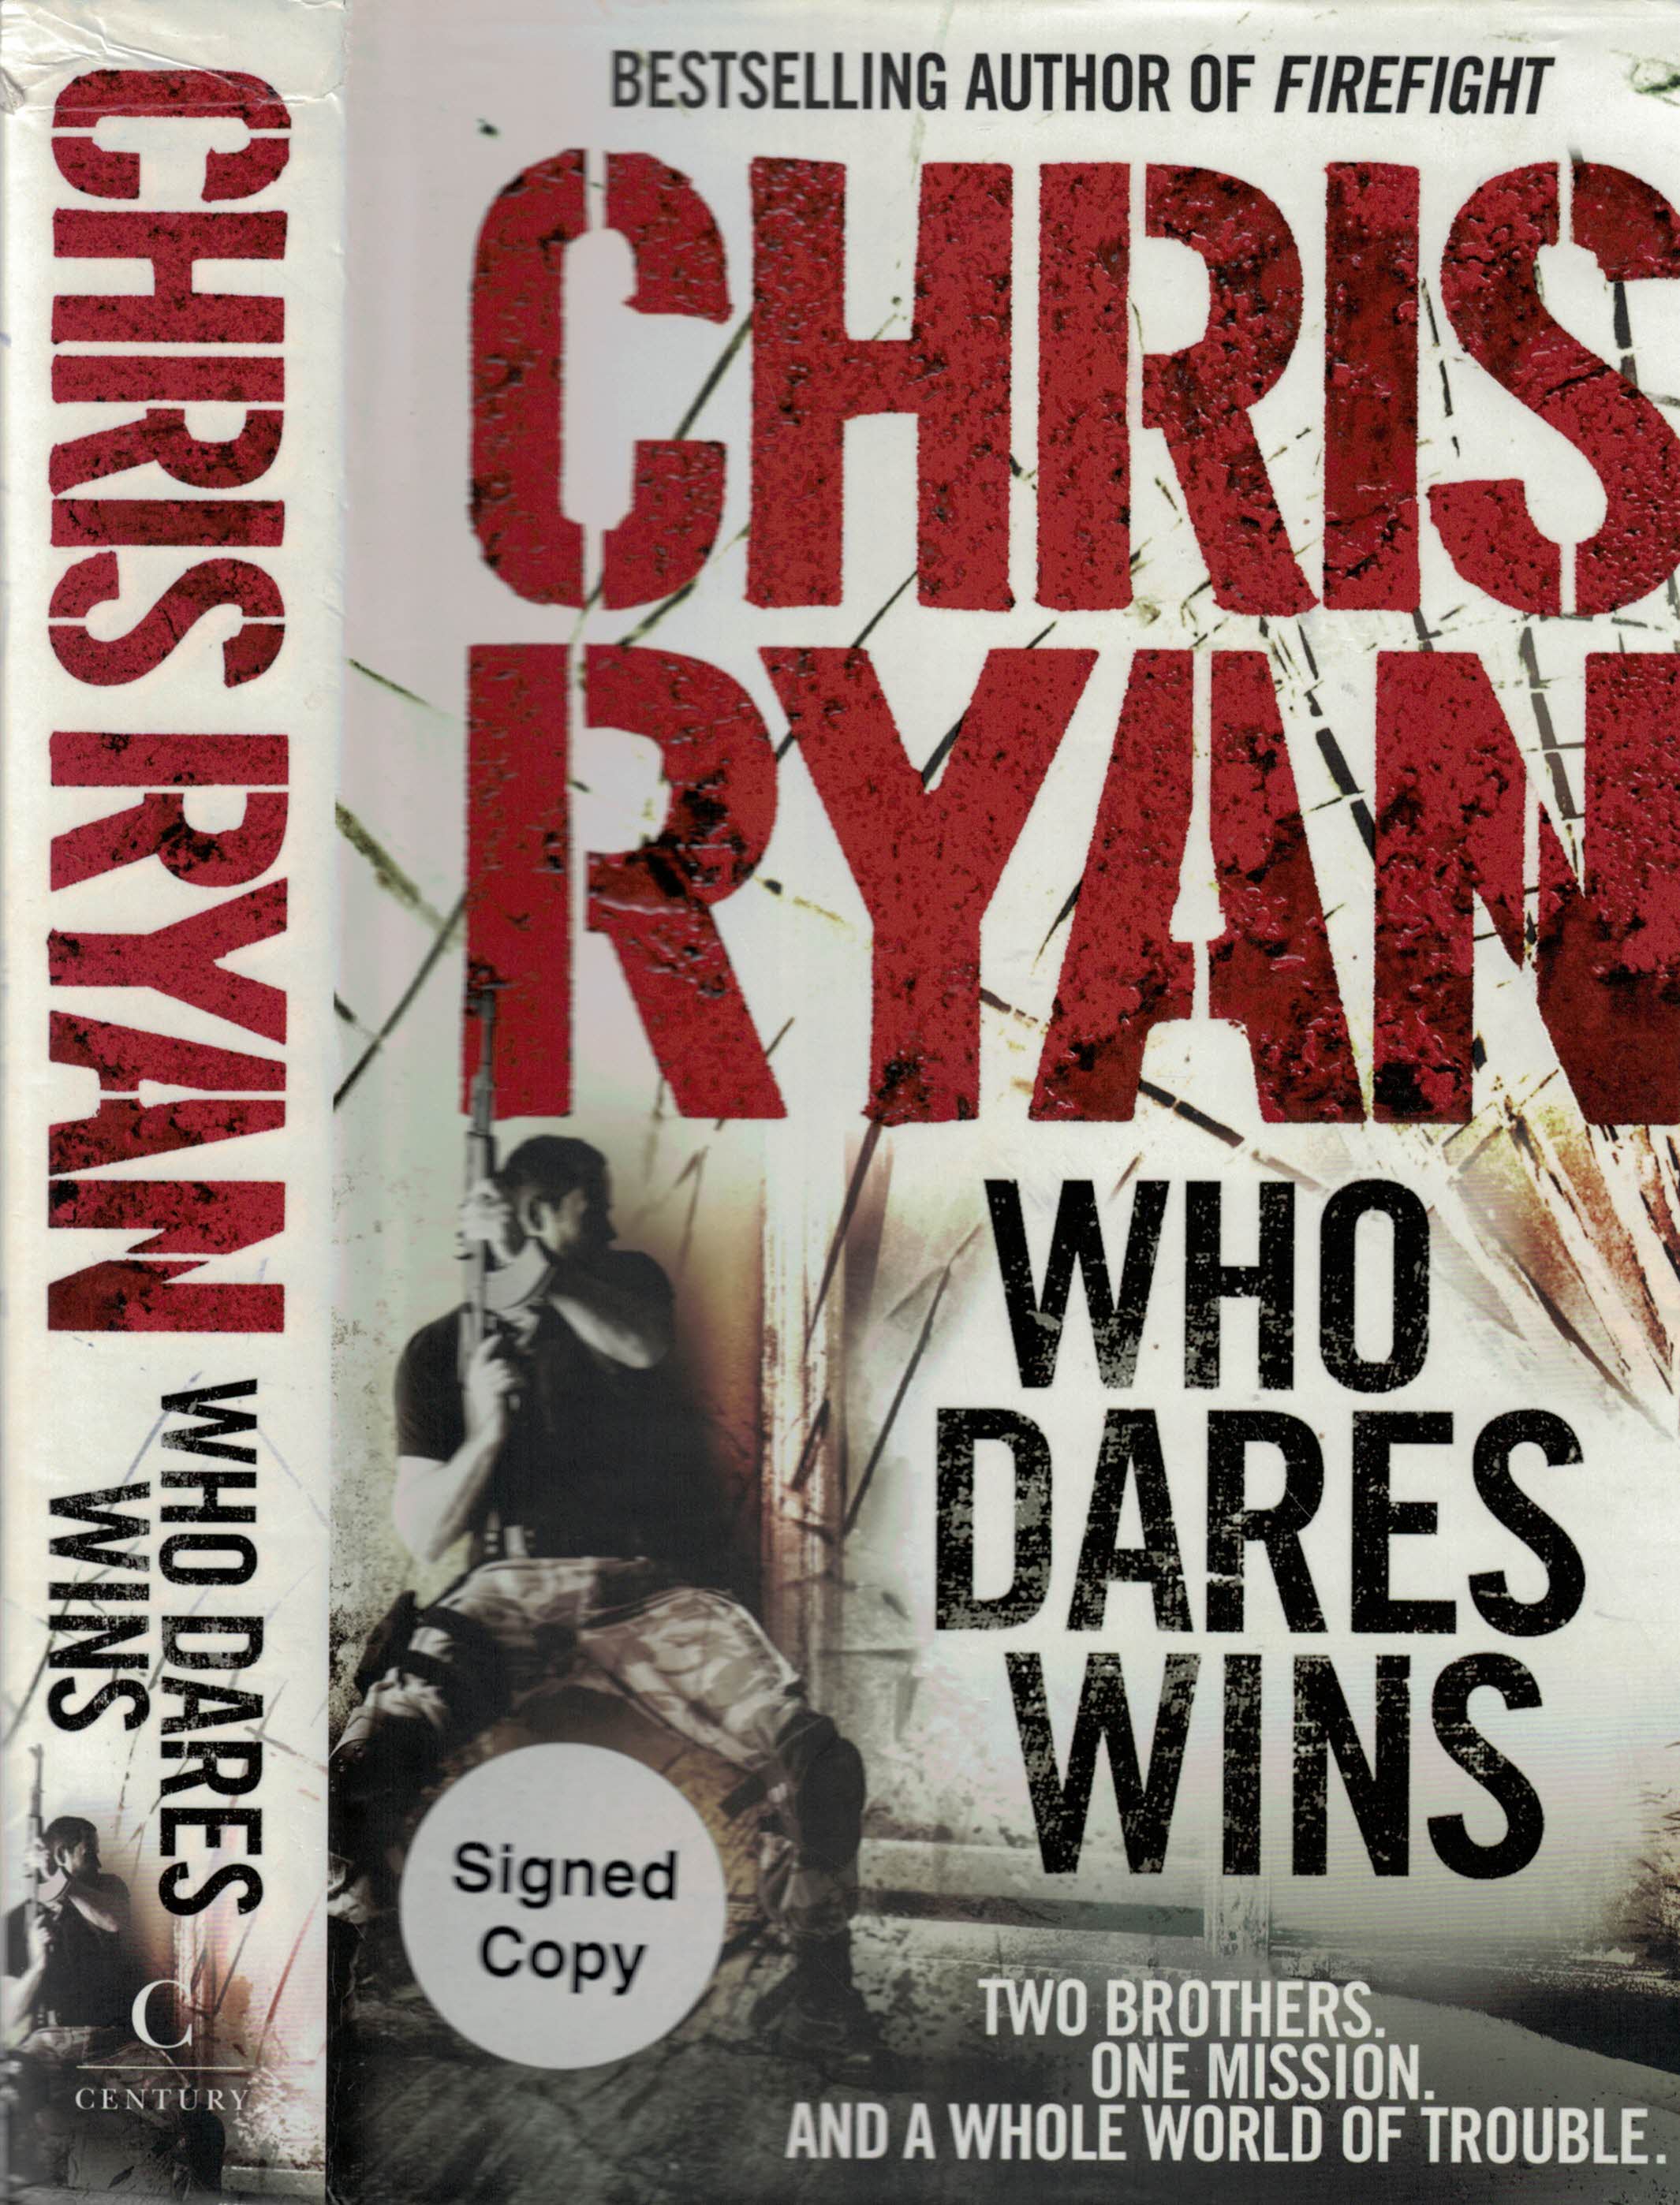 Who Dares Wins. Signed copy.